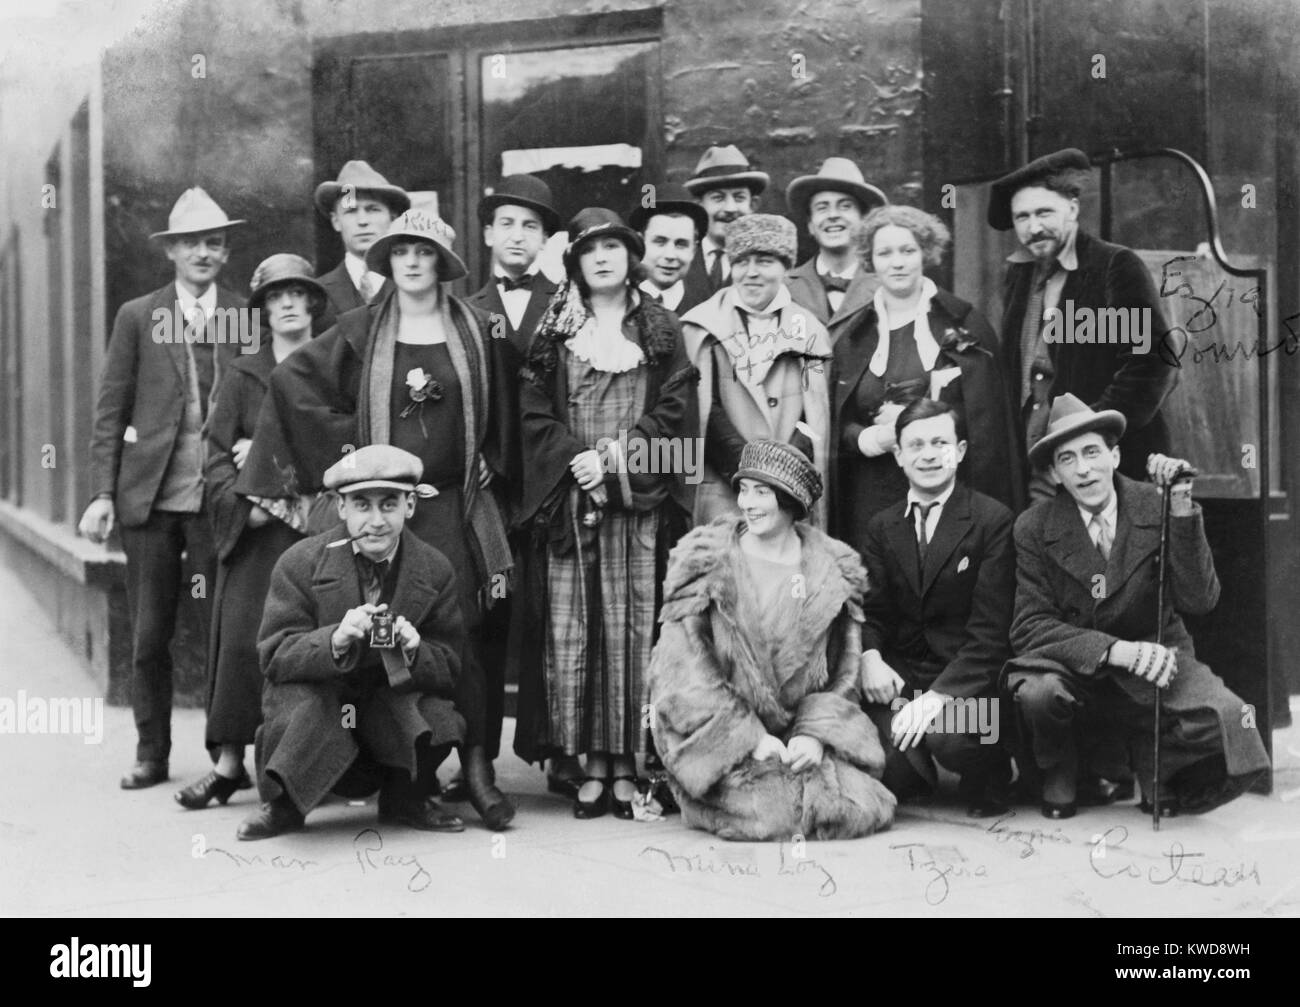 Group portrait of American and European artists and performers in Paris, 1920s. Names written on the photo identifying Avant Guard artist include: Man Ray, Mina Loy, Tristan Tzara, Jean Cocteau, Ezra Pound, Jane Heap, Kiki, and Martha Dennison (BSLOC 2016 8 135) Stock Photo